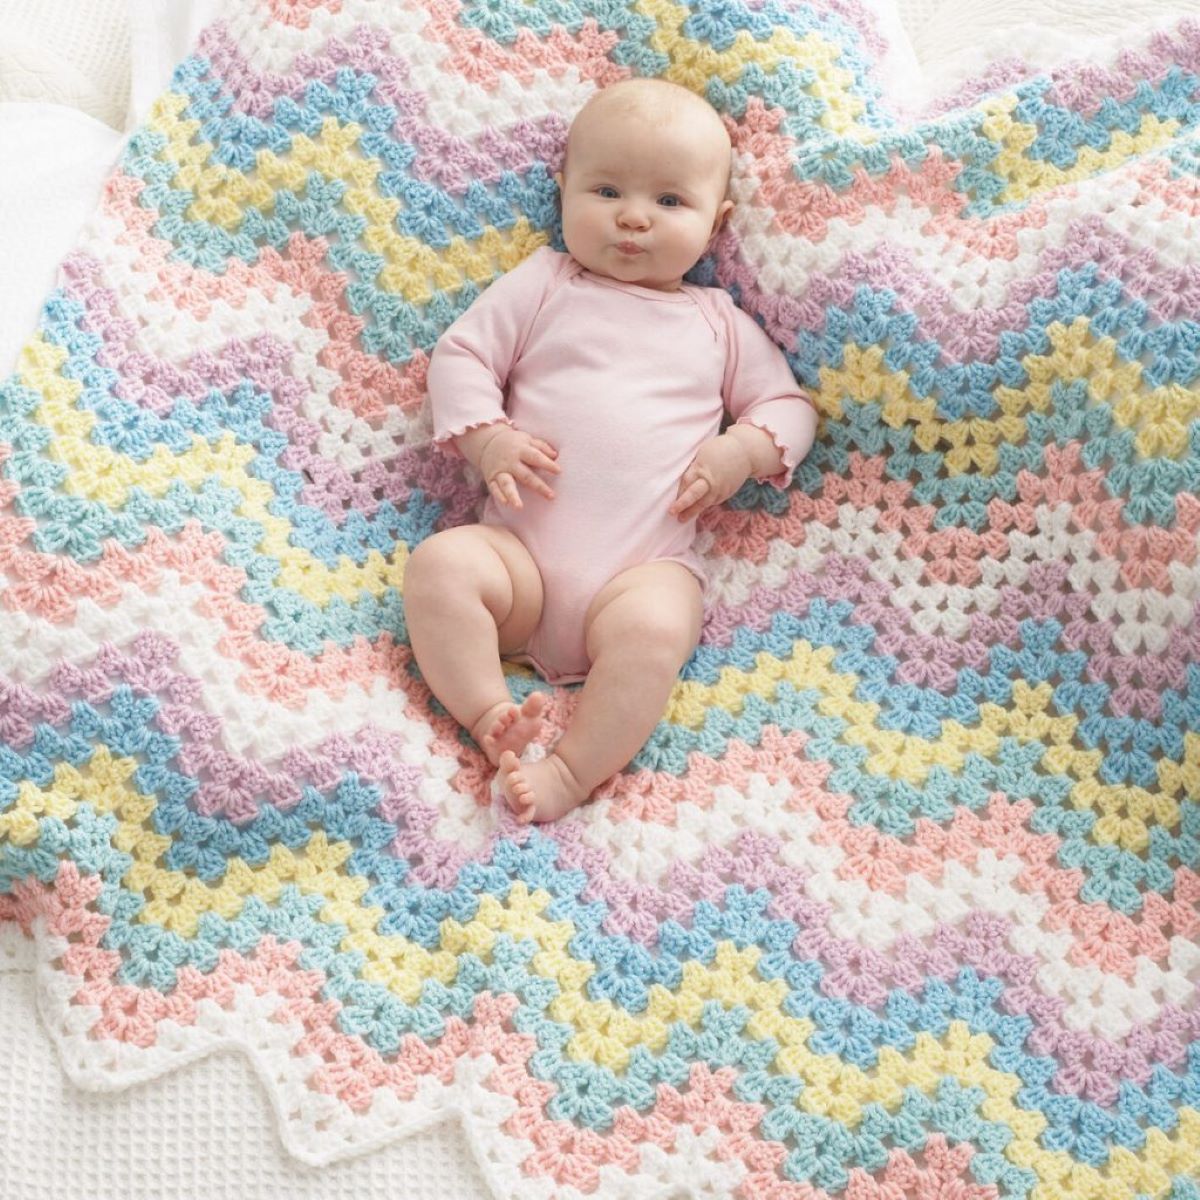 What Is The Best Crochet Stitch For A Baby Blanket